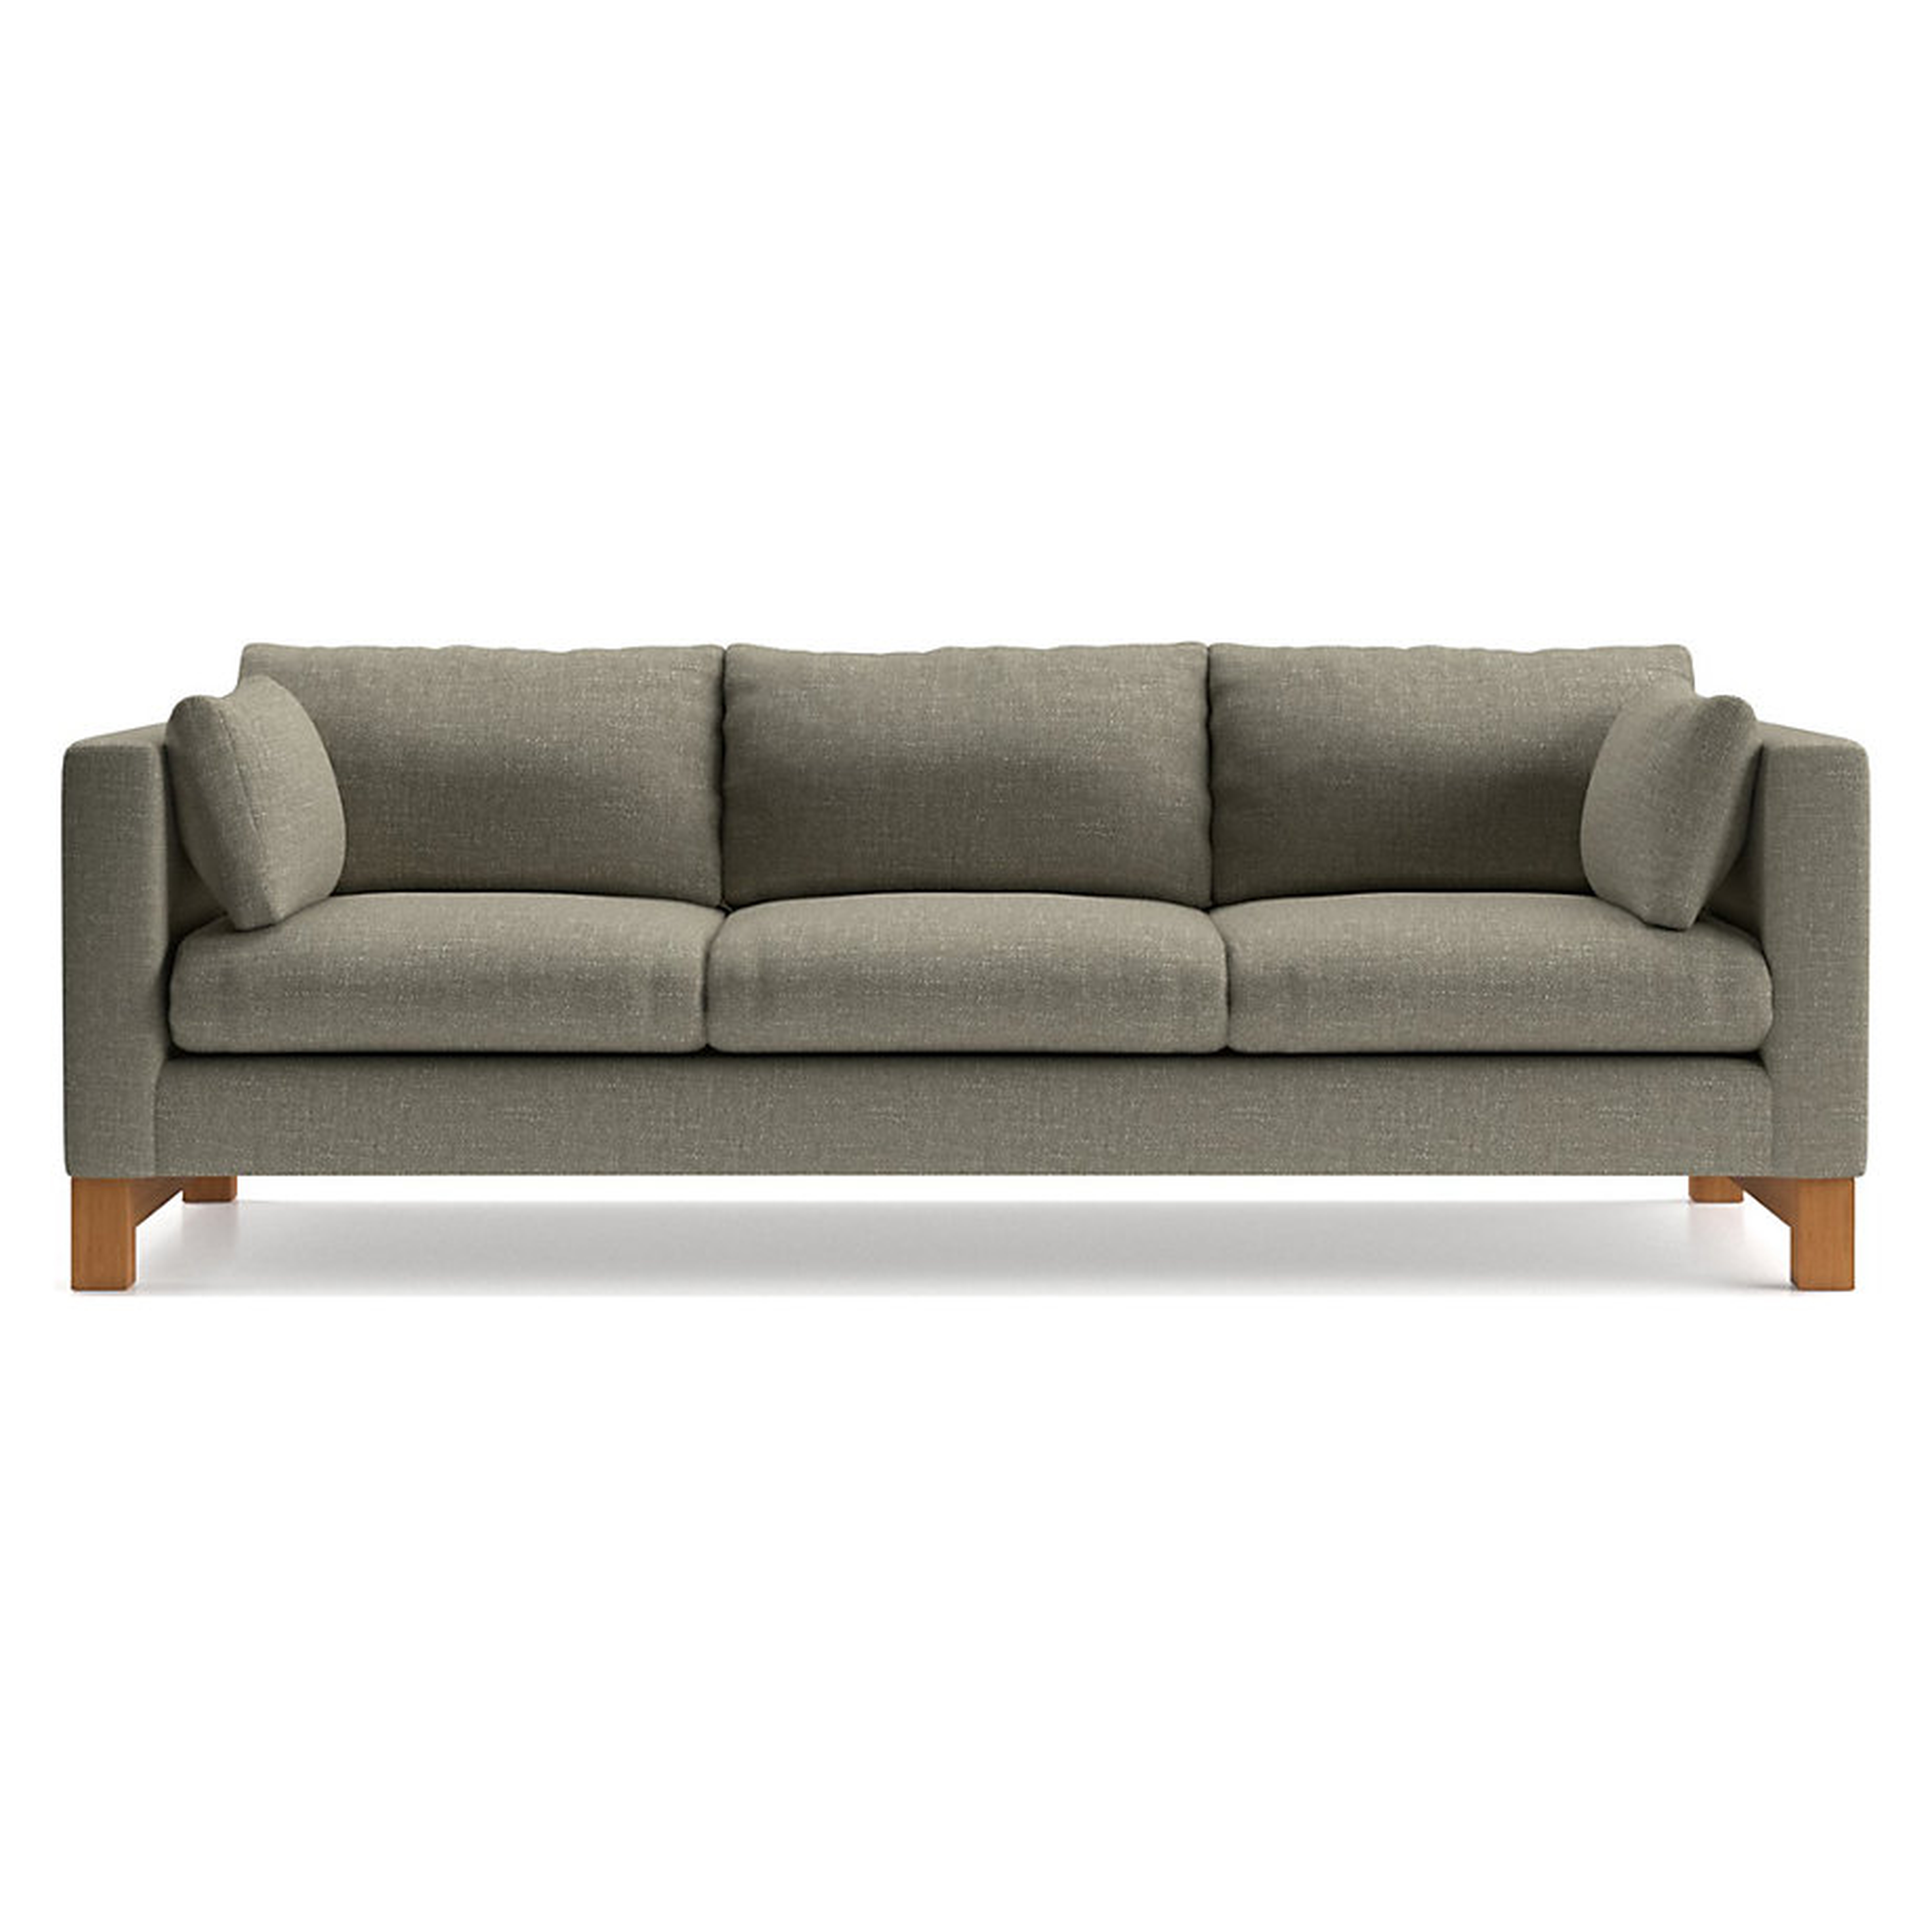 Pacific 3-Seat Track Arm Grande Sofa with Wood Legs - Crate and Barrel